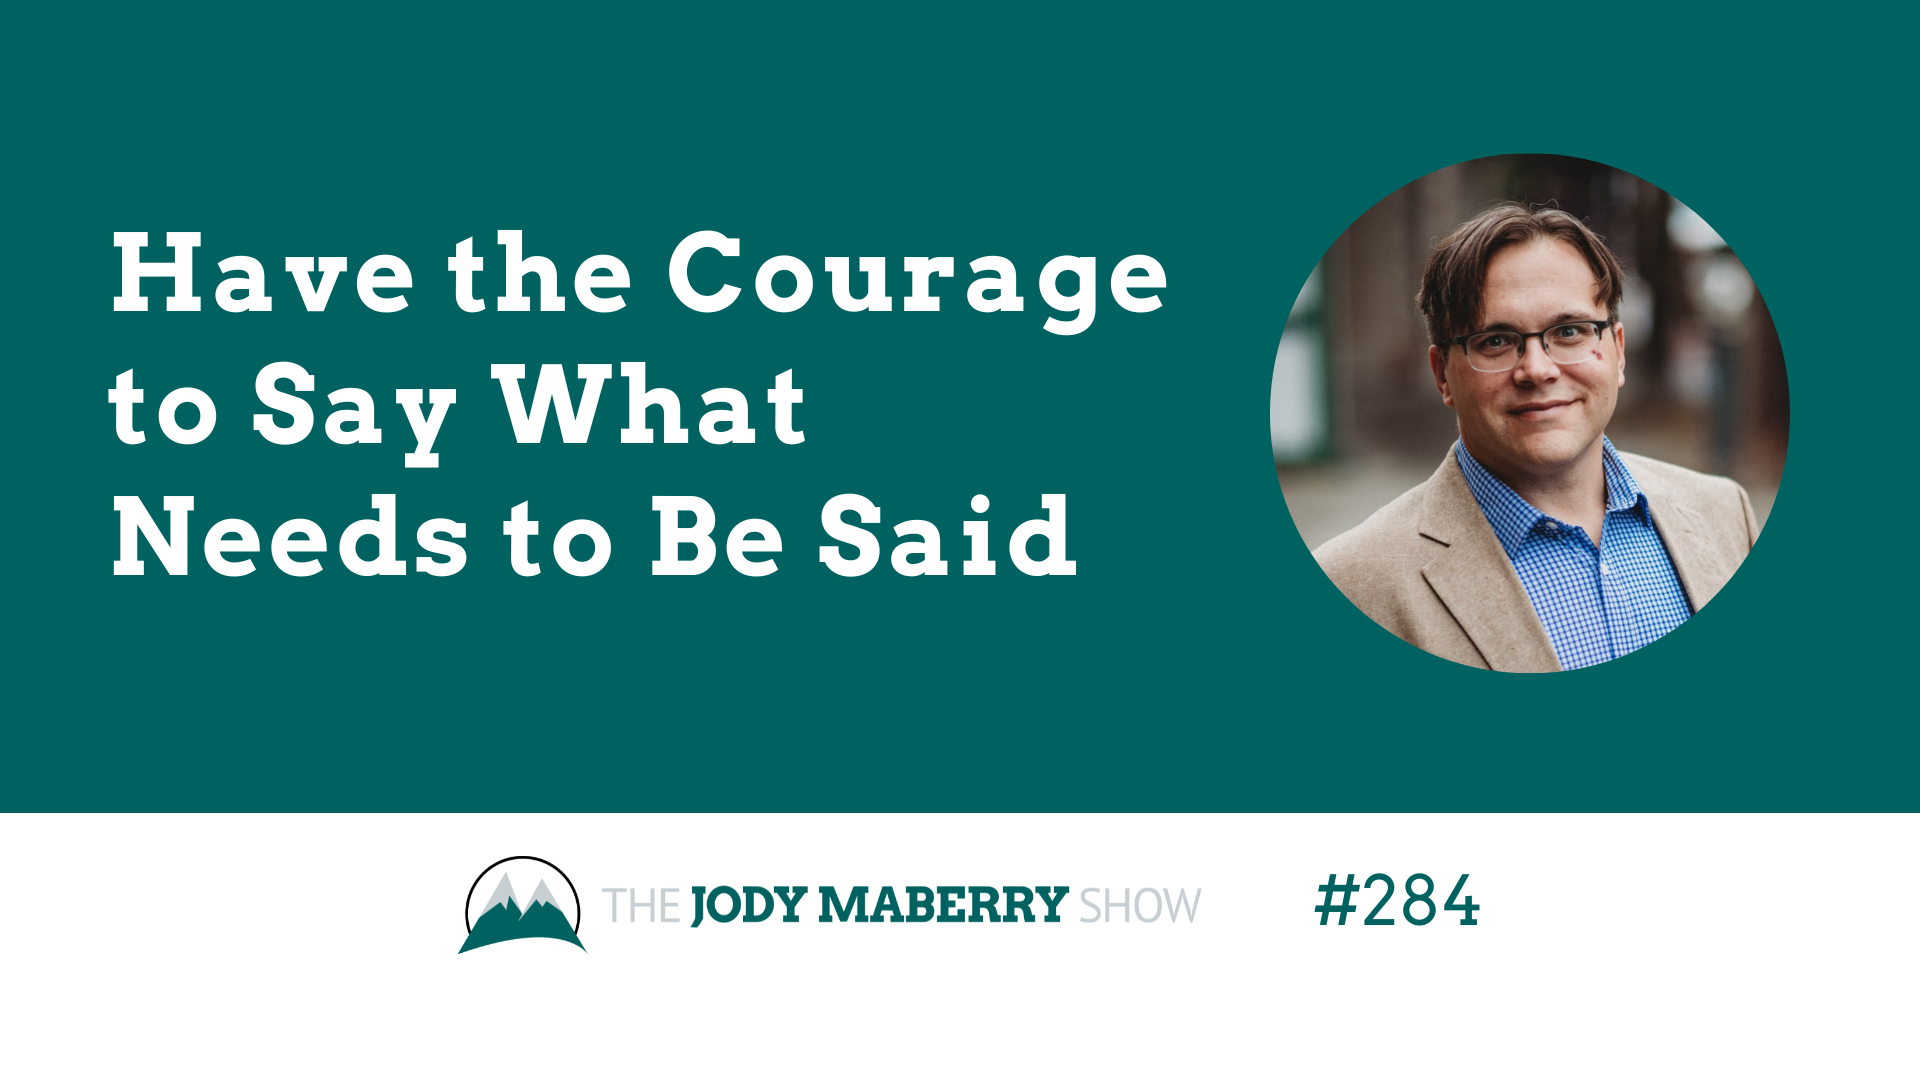 Jody Maberry Show Episode 284 Have the Courage to Say What Needs to Be Said